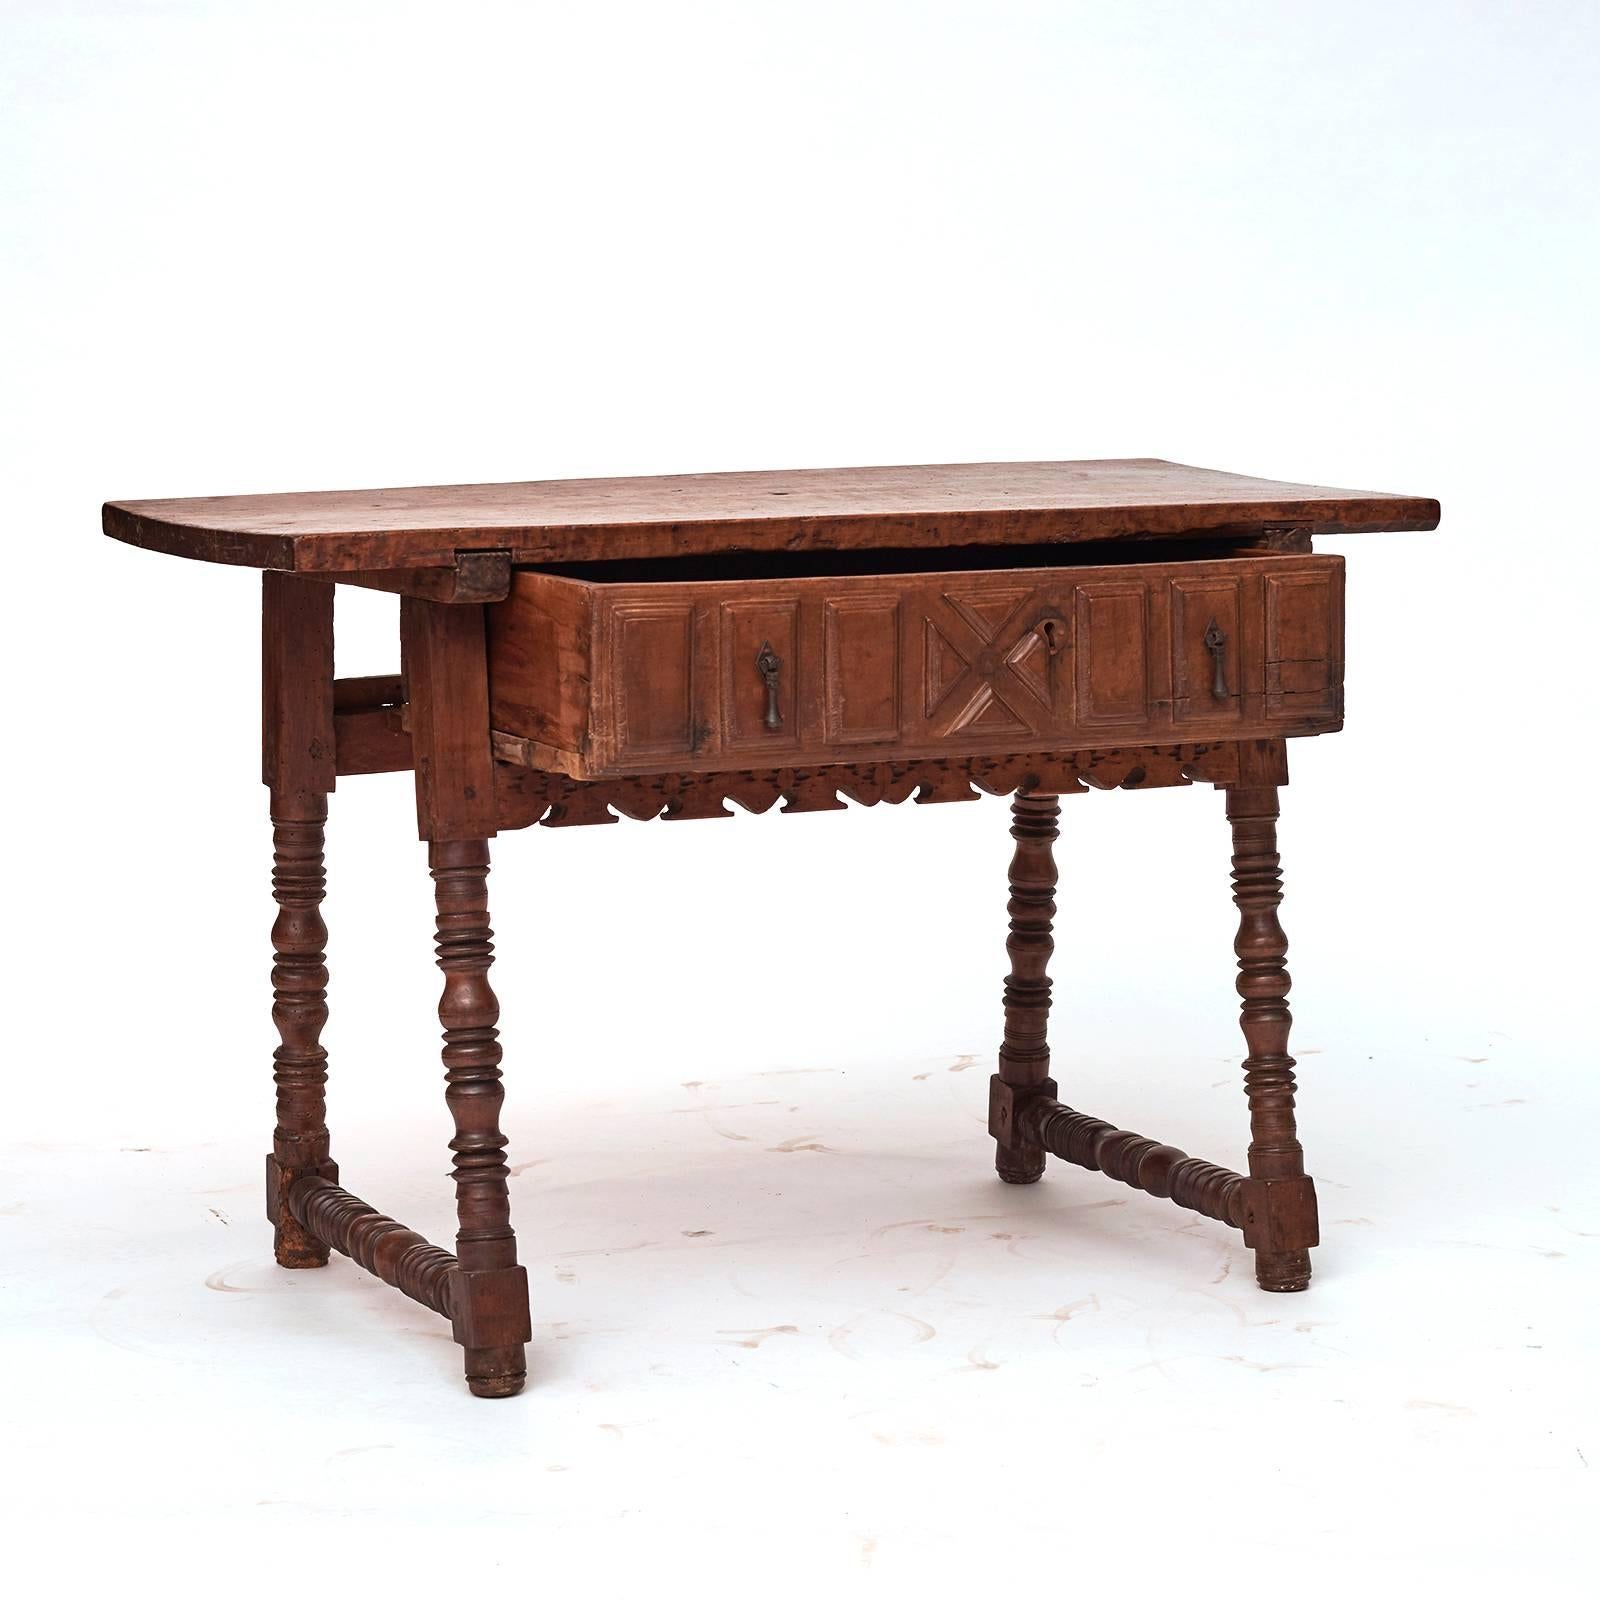 Barok table, walnut.
Tabletop one piece of wood. One drawer.
Spain, circa 1650.
The table is untouched with a good patina (good condition).